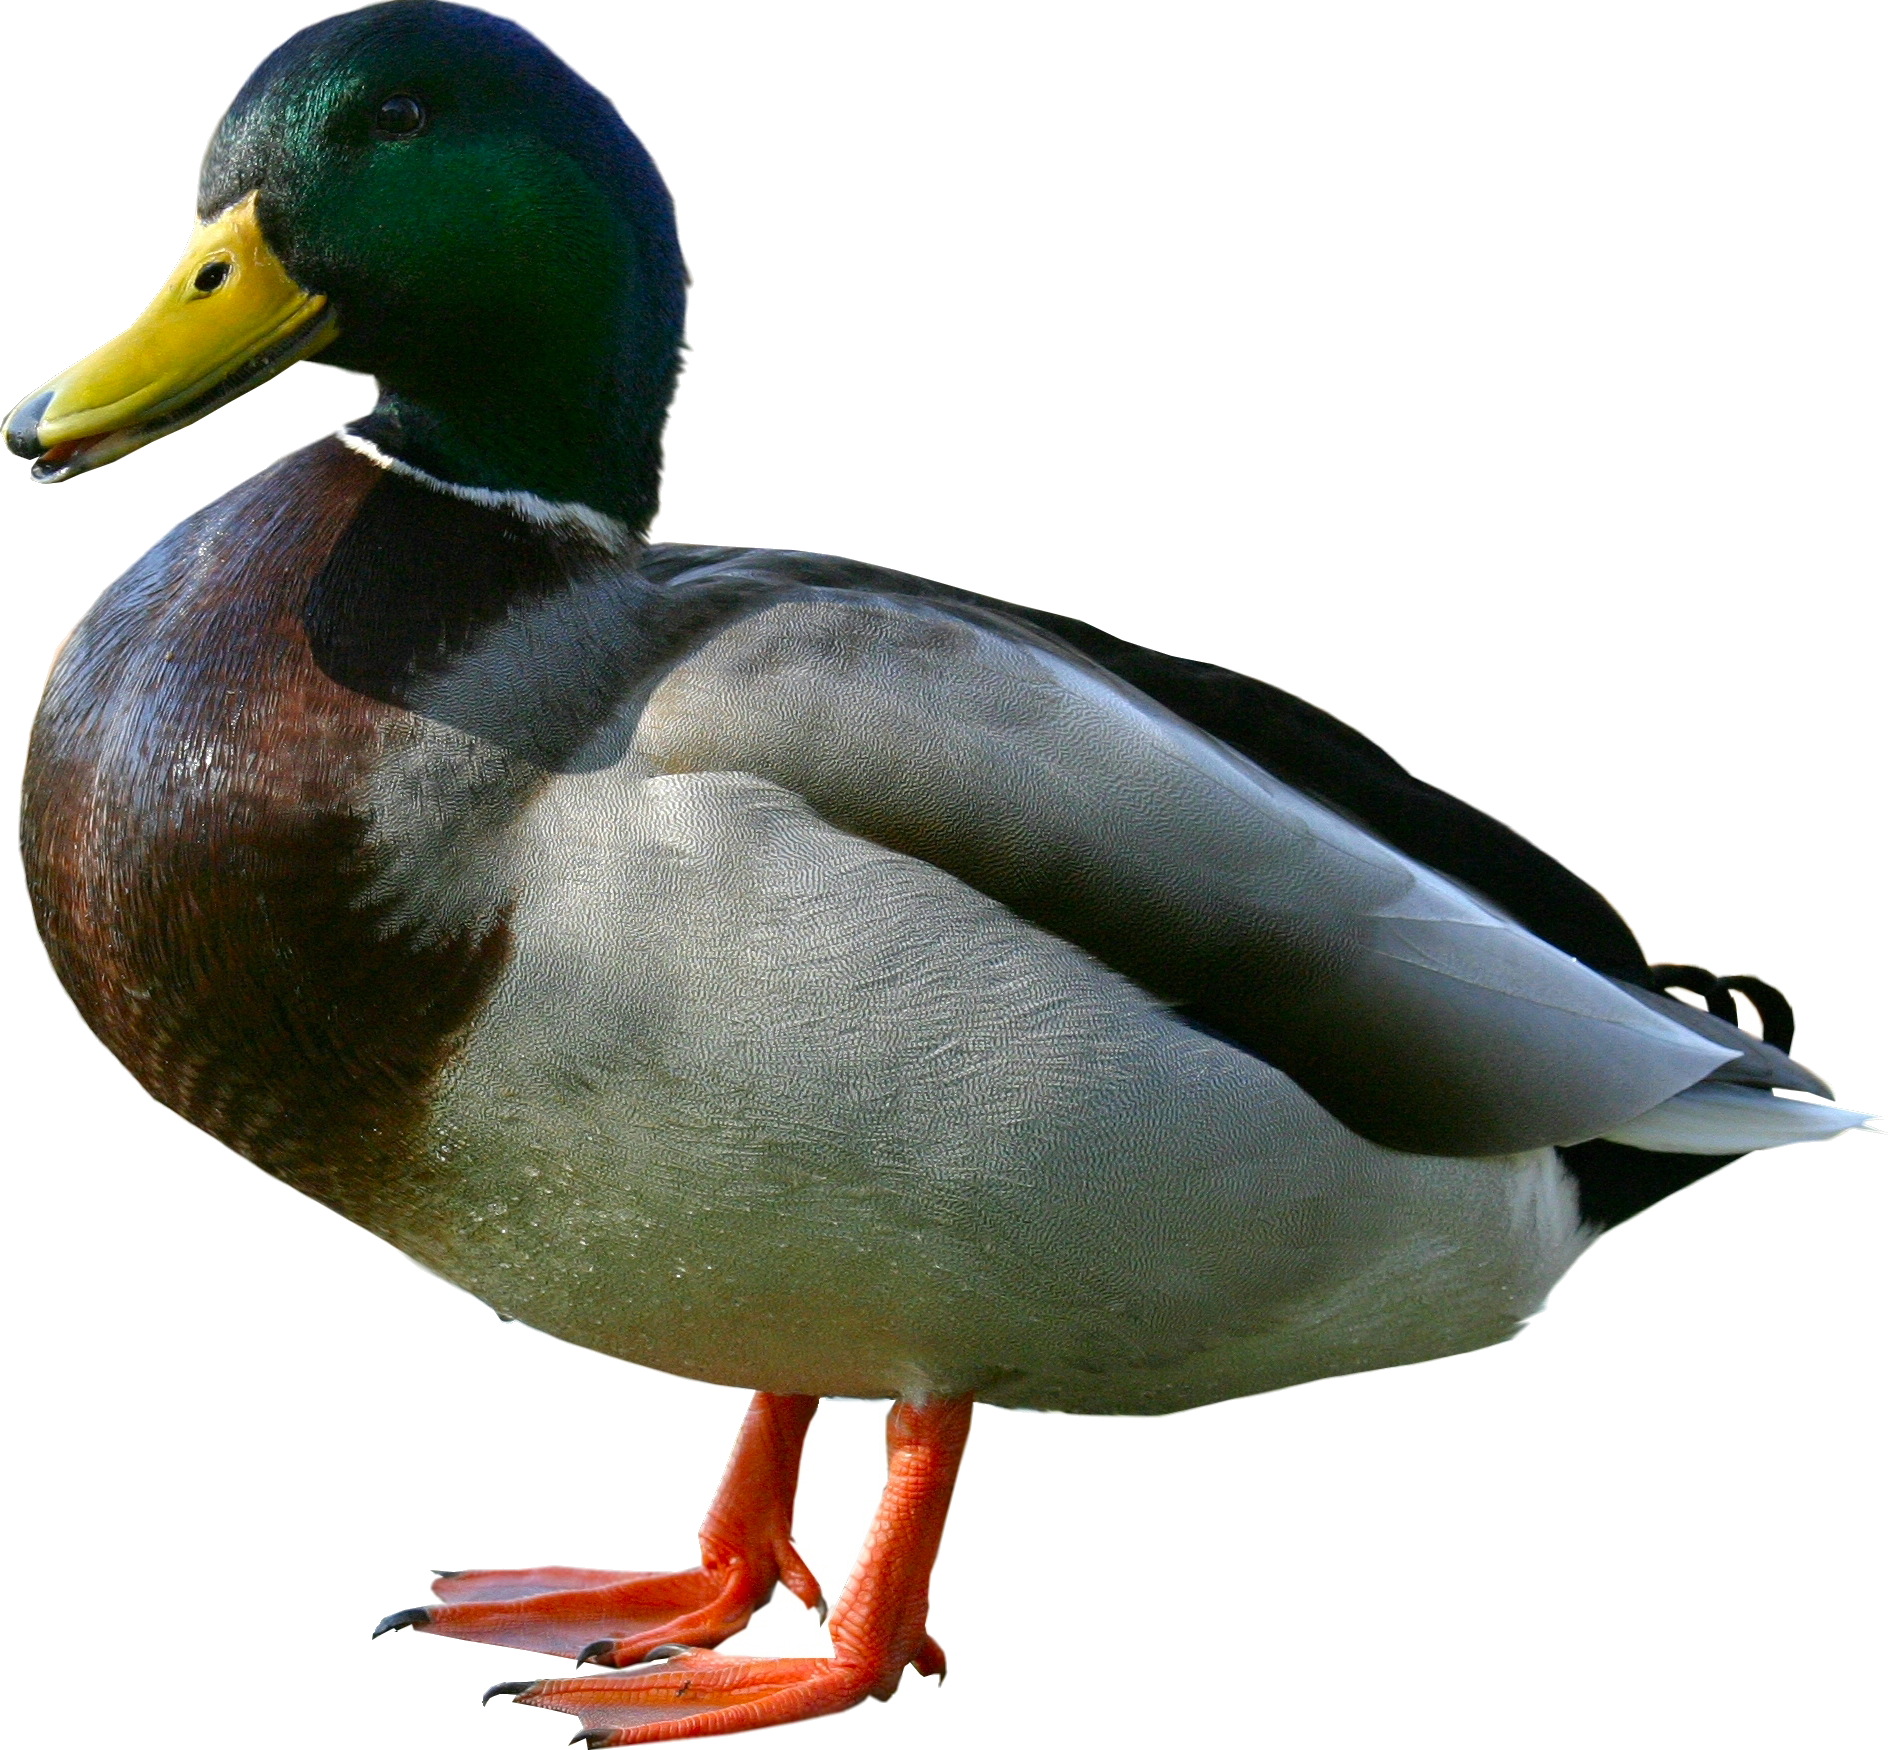 White Duck Png image #20127